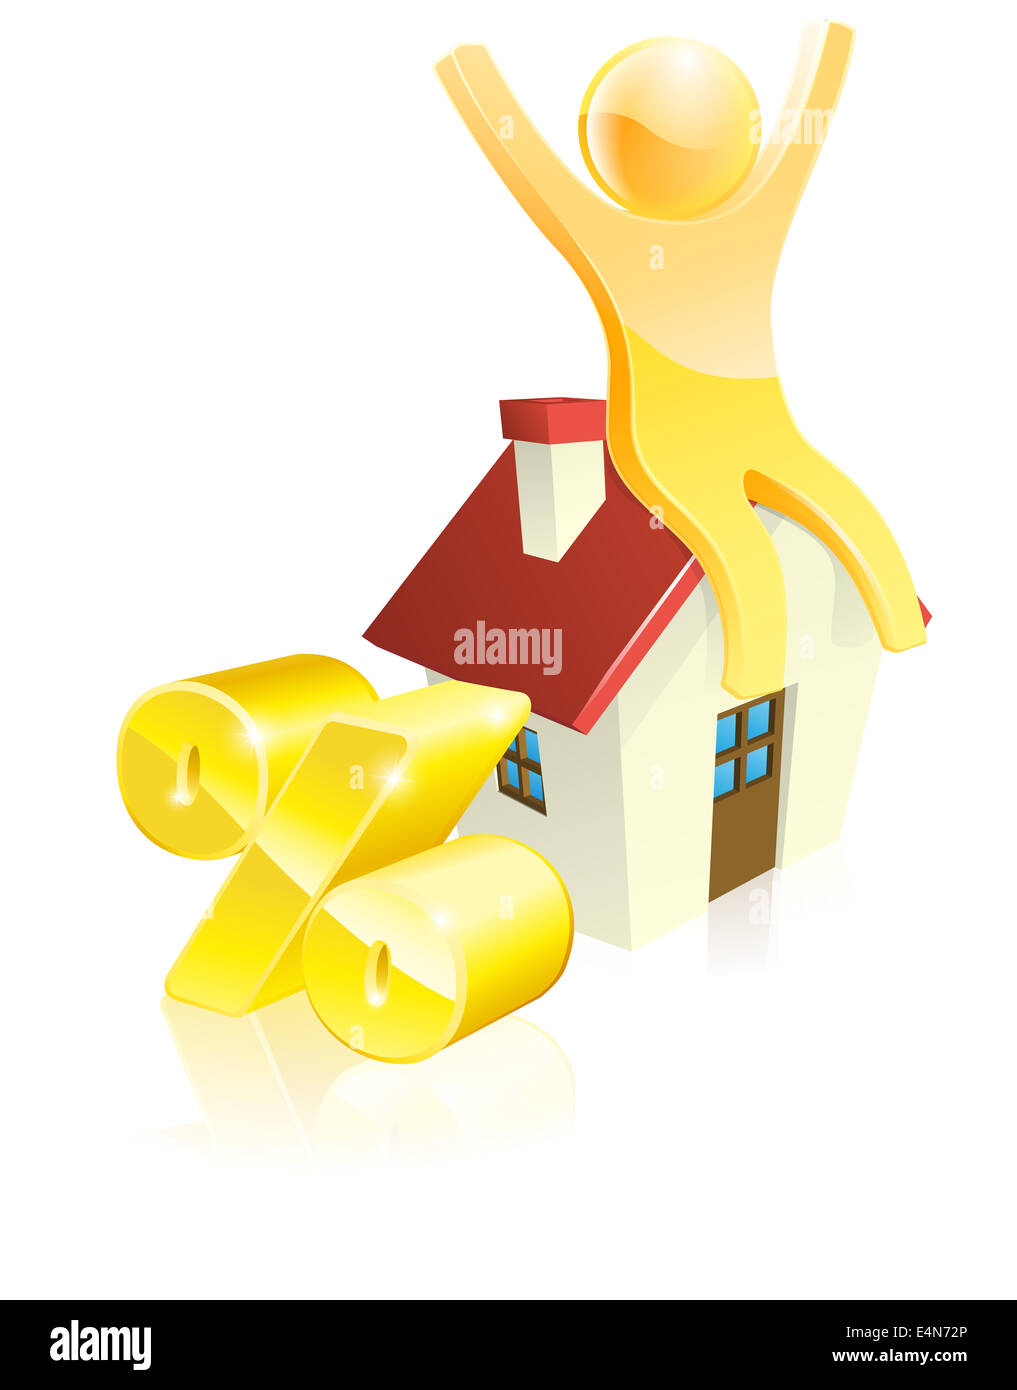 Mascot house percent concept of man sitting on house with arms up and gold percentage sign. Could be concept for many financial Stock Photo